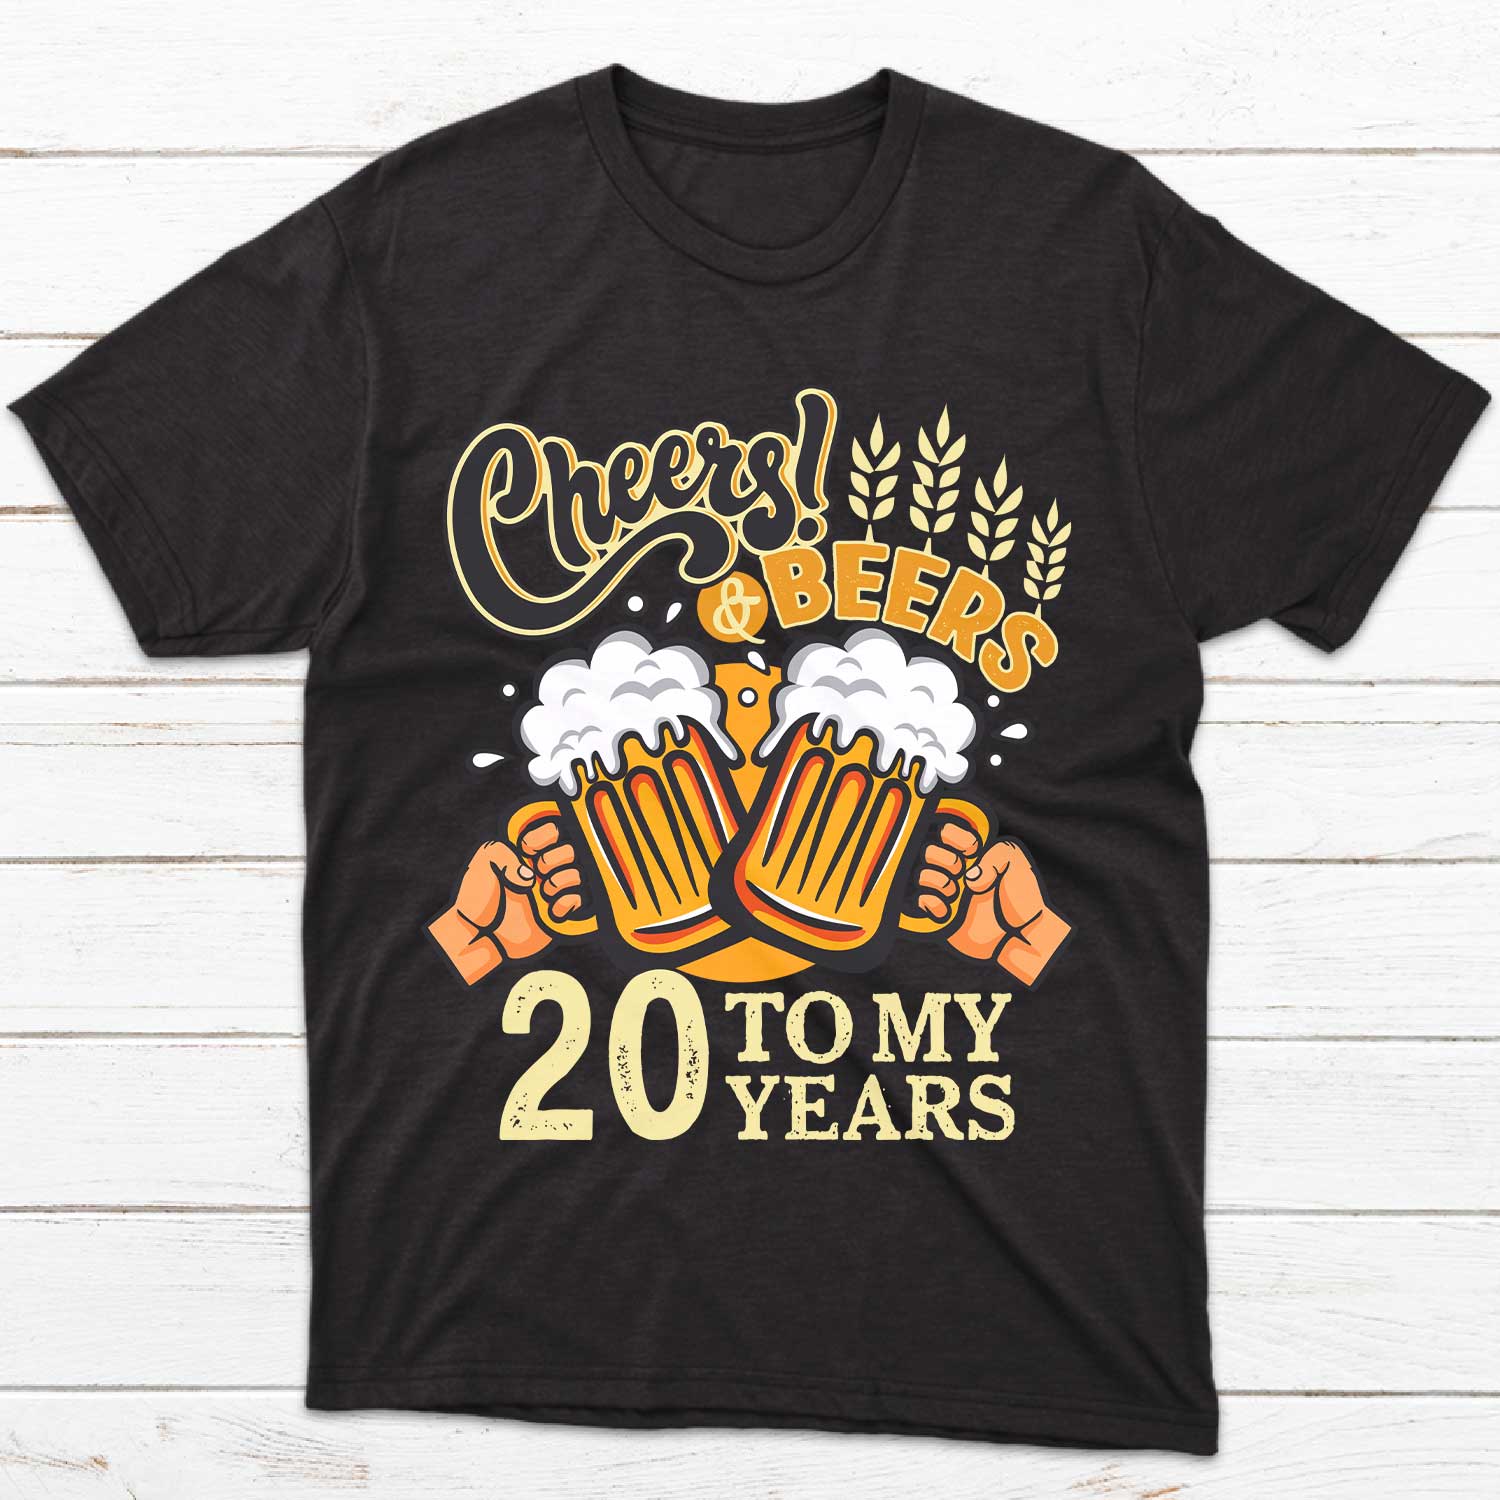 Cheers & Beers To My Birthday Personalized Shirt